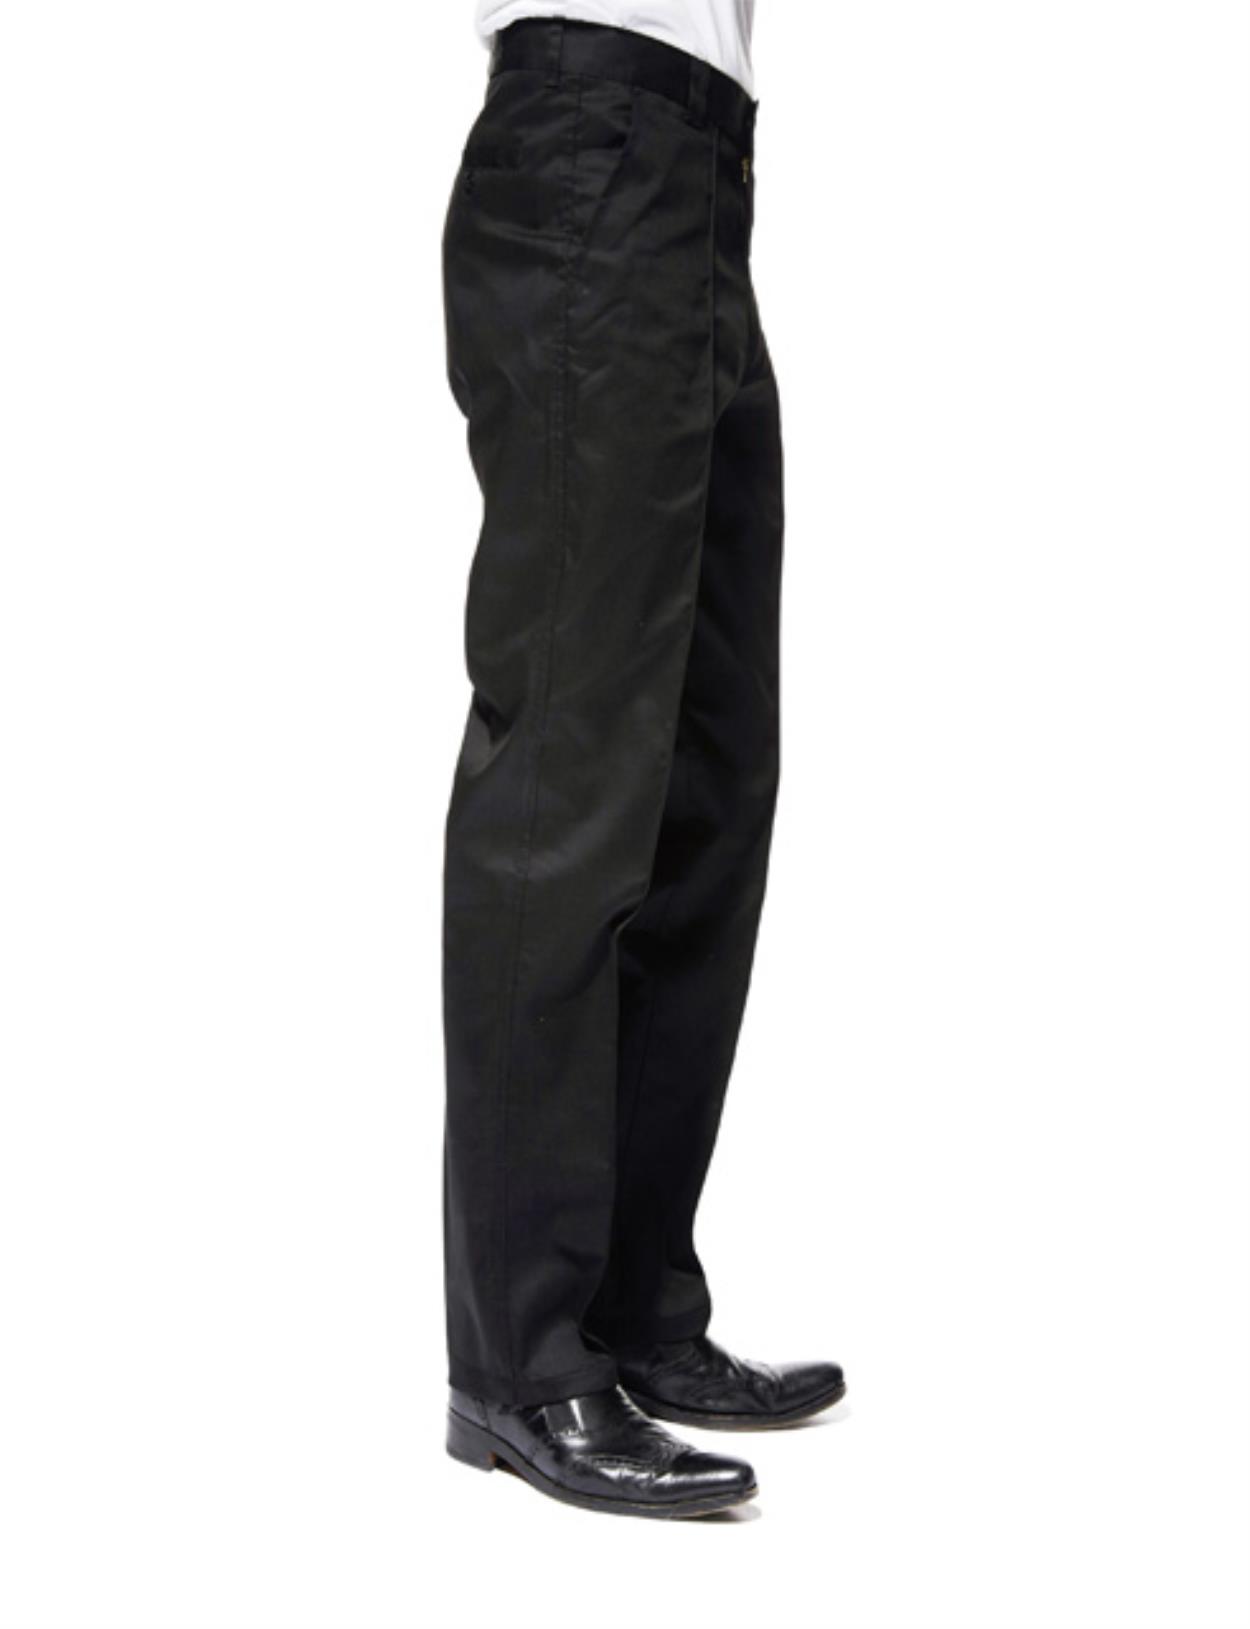 UC901 Workwear Trouser secondary Image